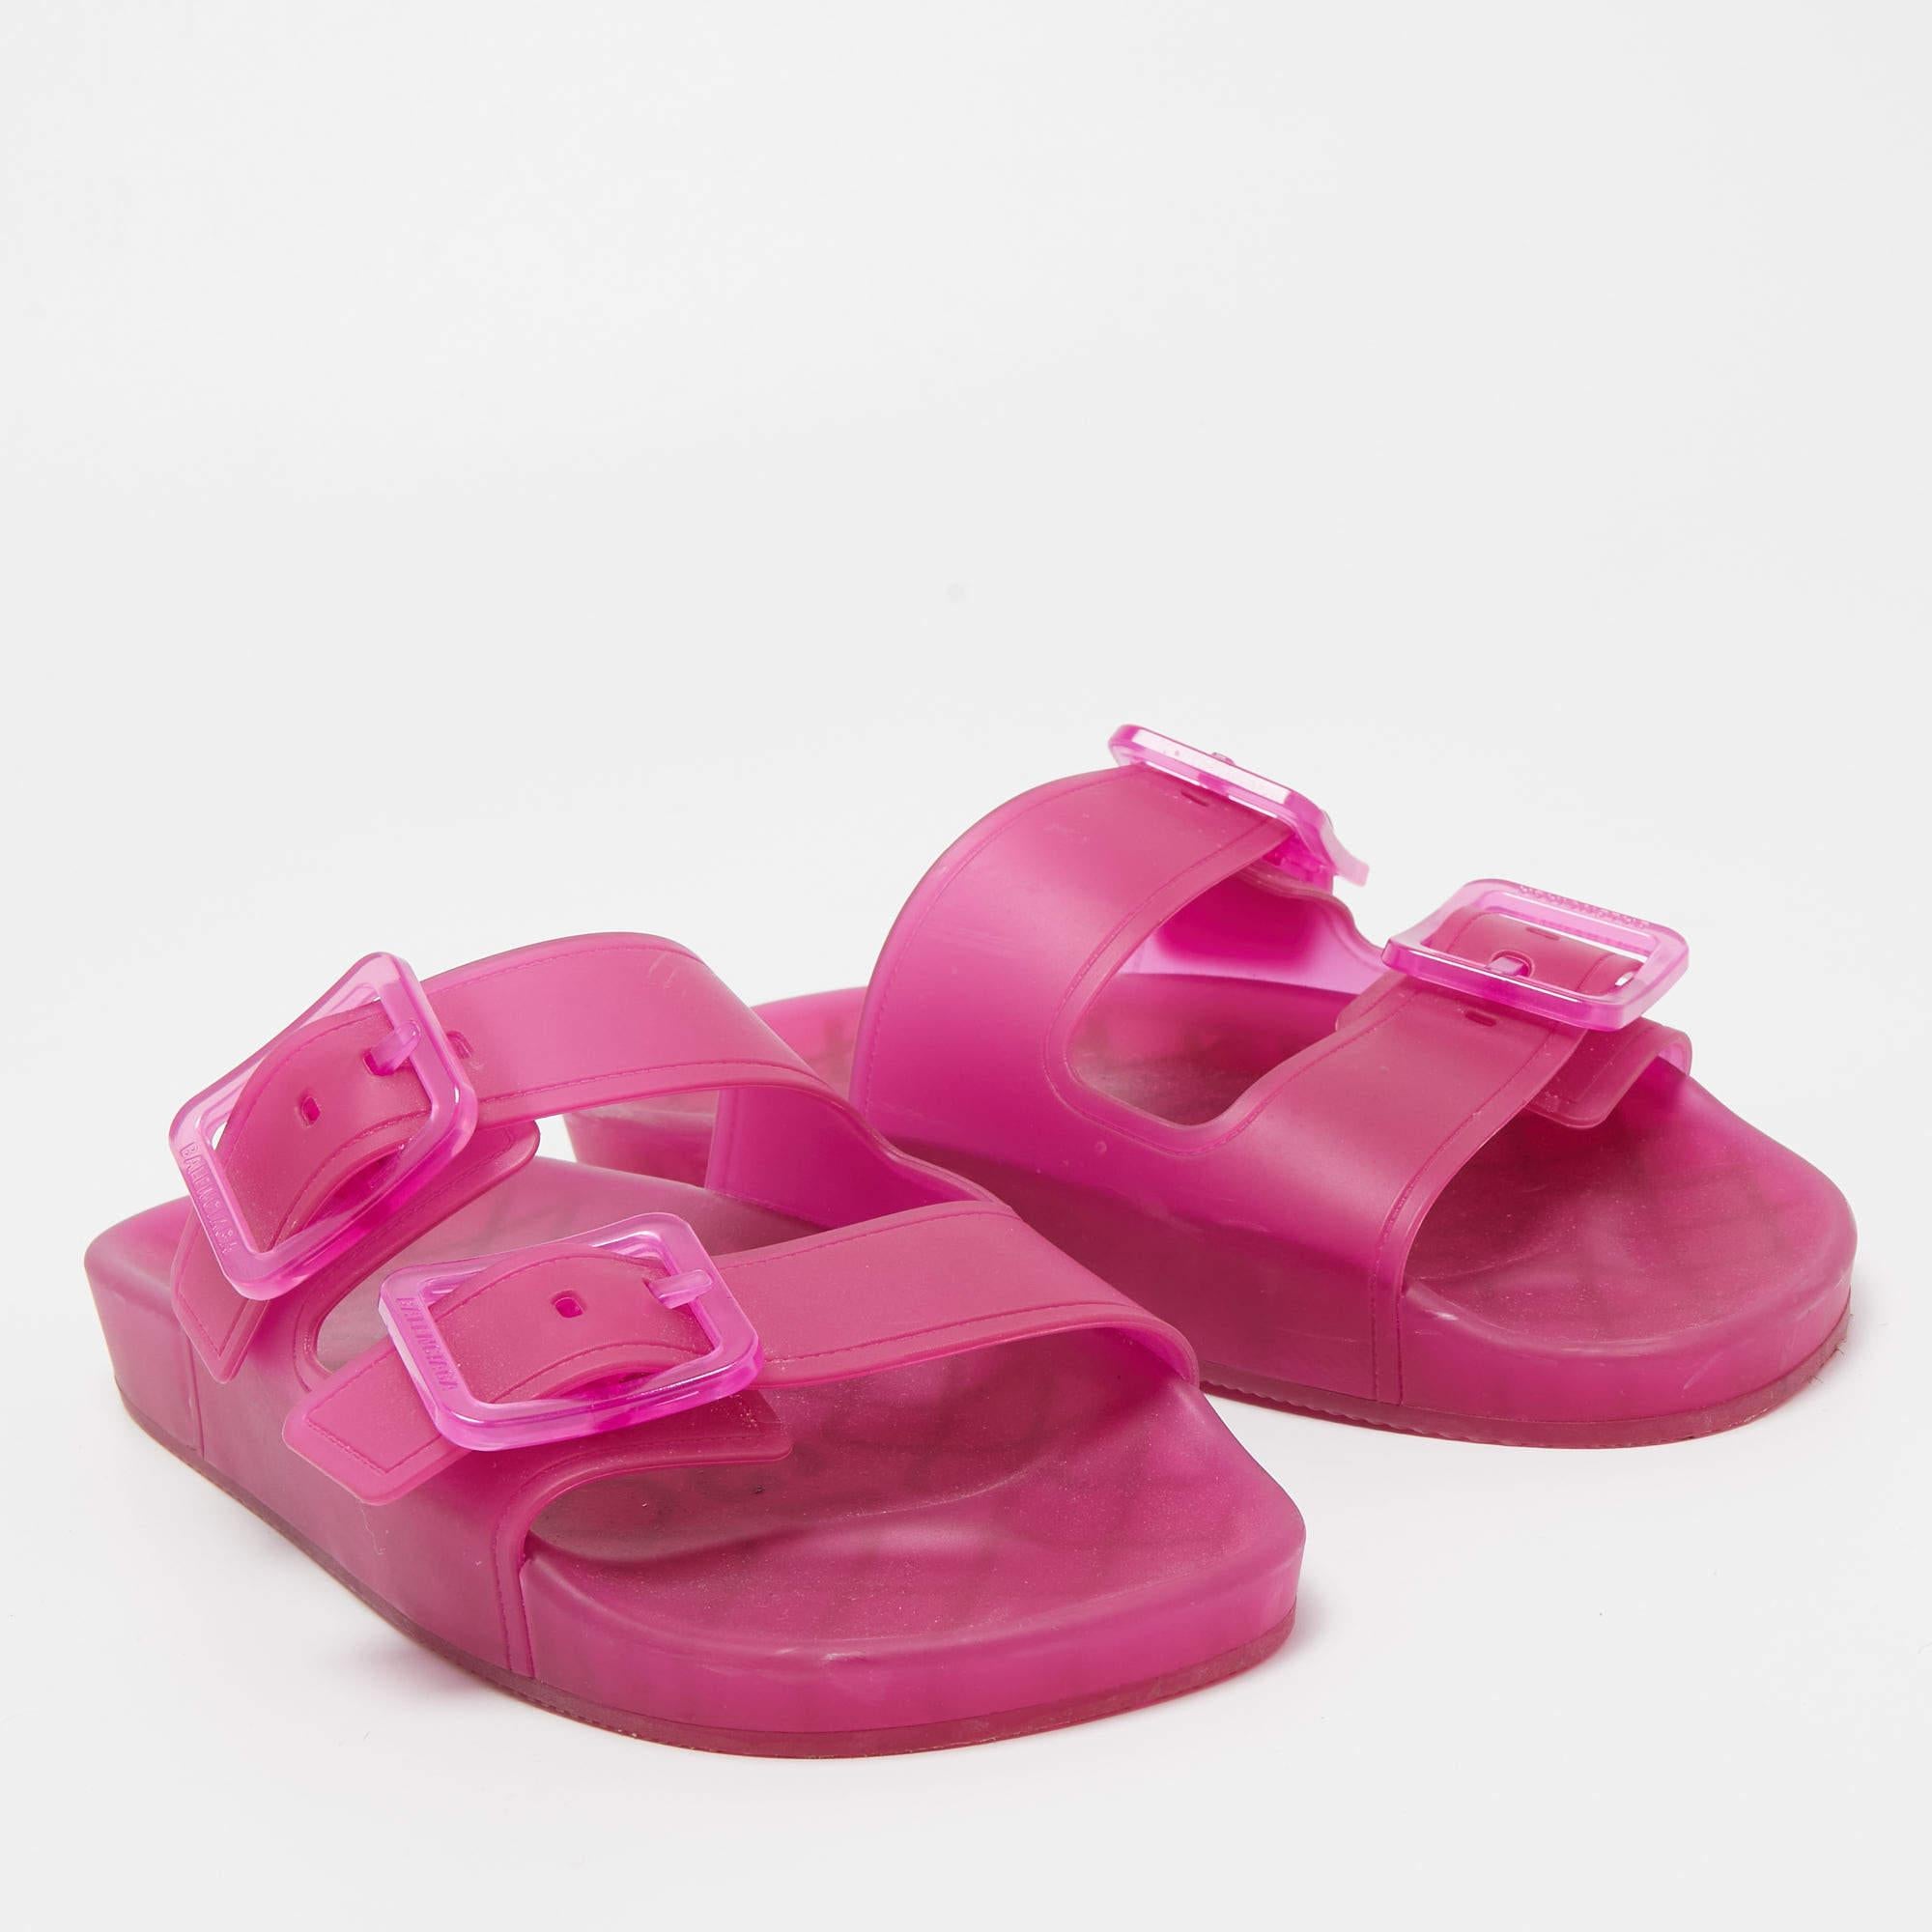 Balenciaga Pink Rubber Double Buckle Detail Flat Sandals Size 38 For Sale 1